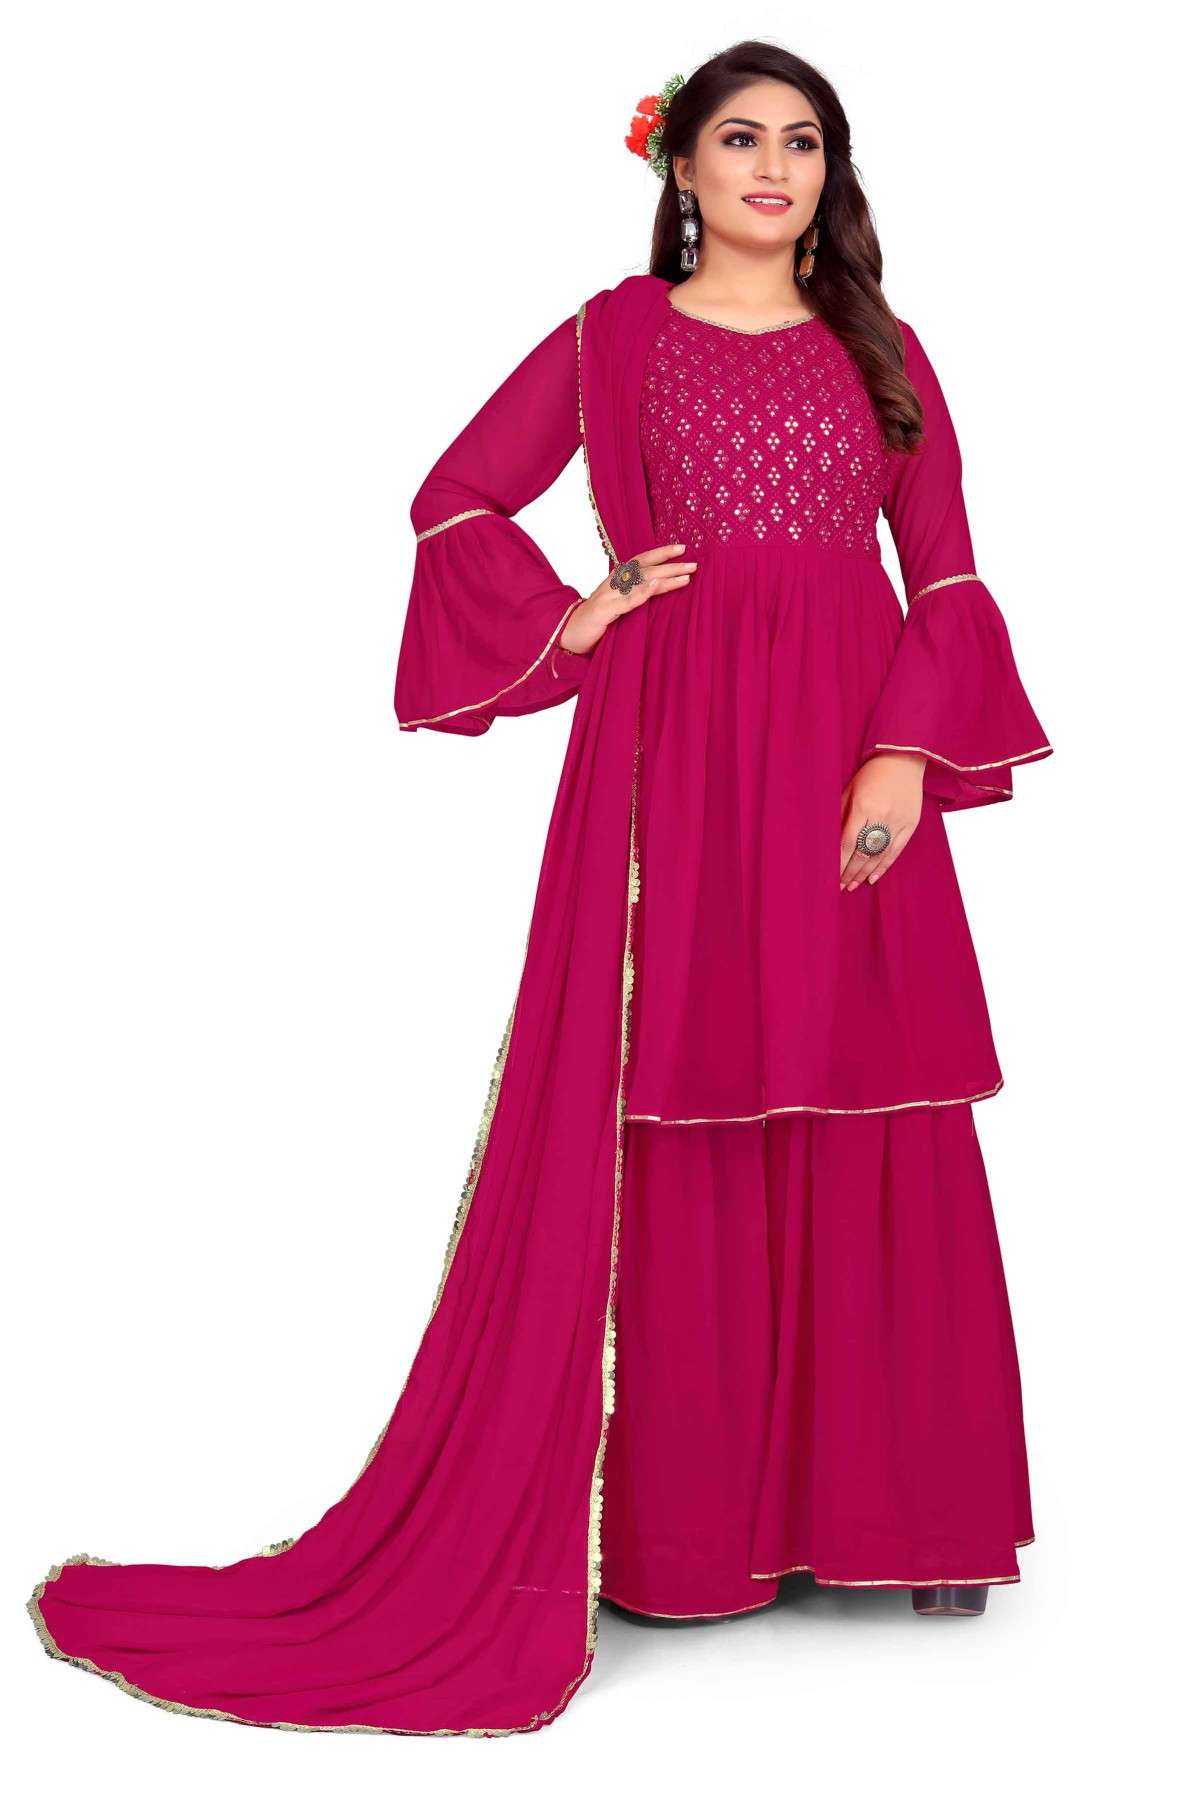 Faux Georgette Printed Sharara Suit In Pink Colour - SM5641710